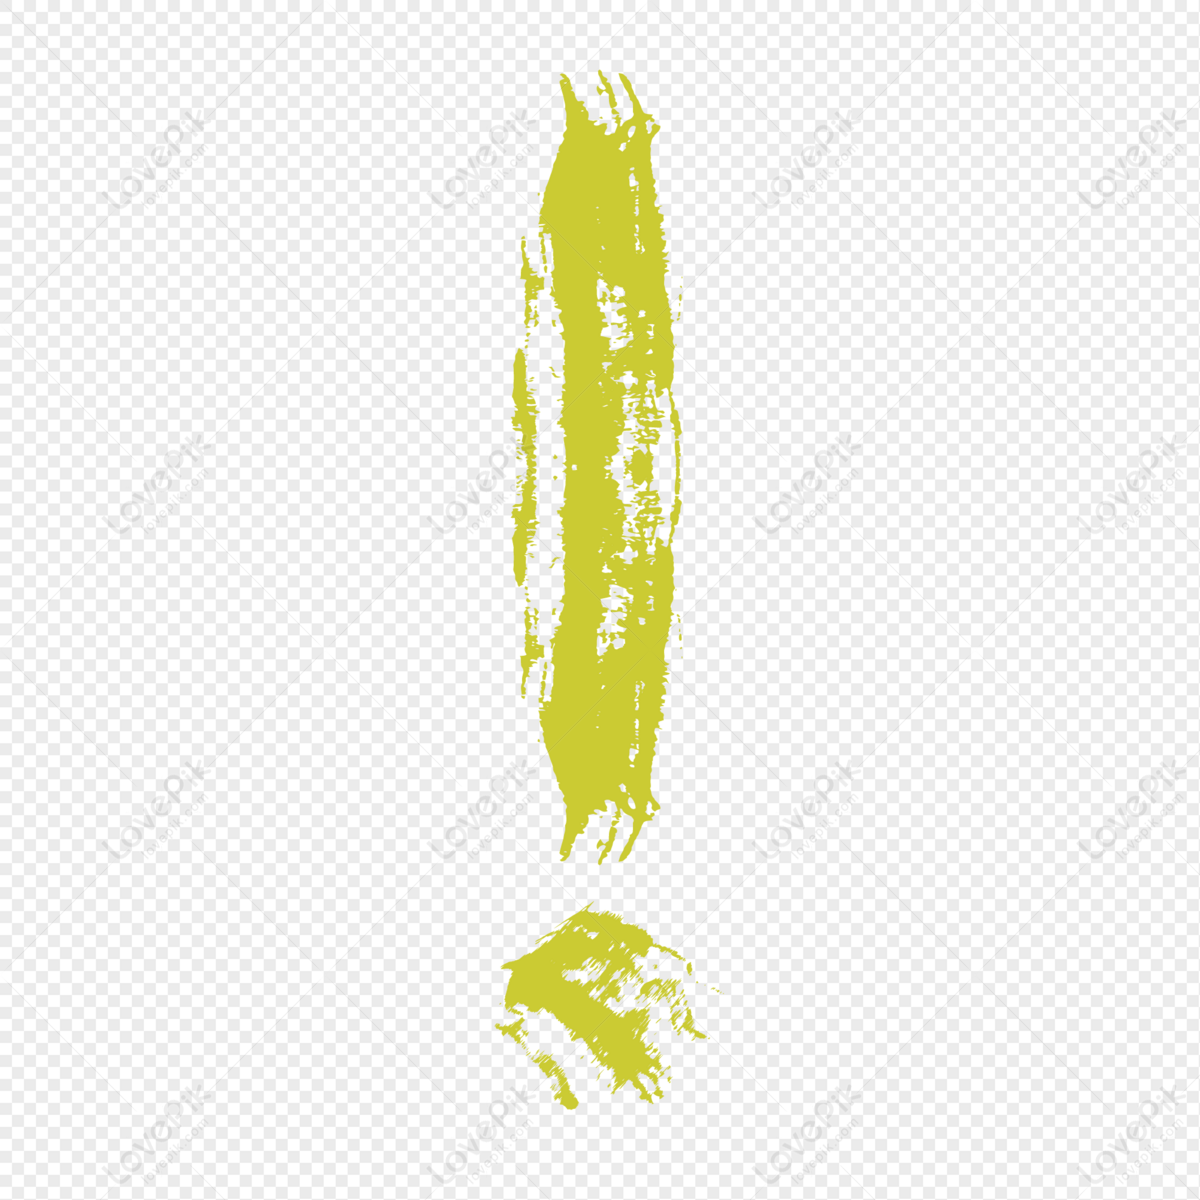 Yellow Exclamation Mark PNG Transparent Image And Clipart Image For Free  Download - Lovepik | 401351817